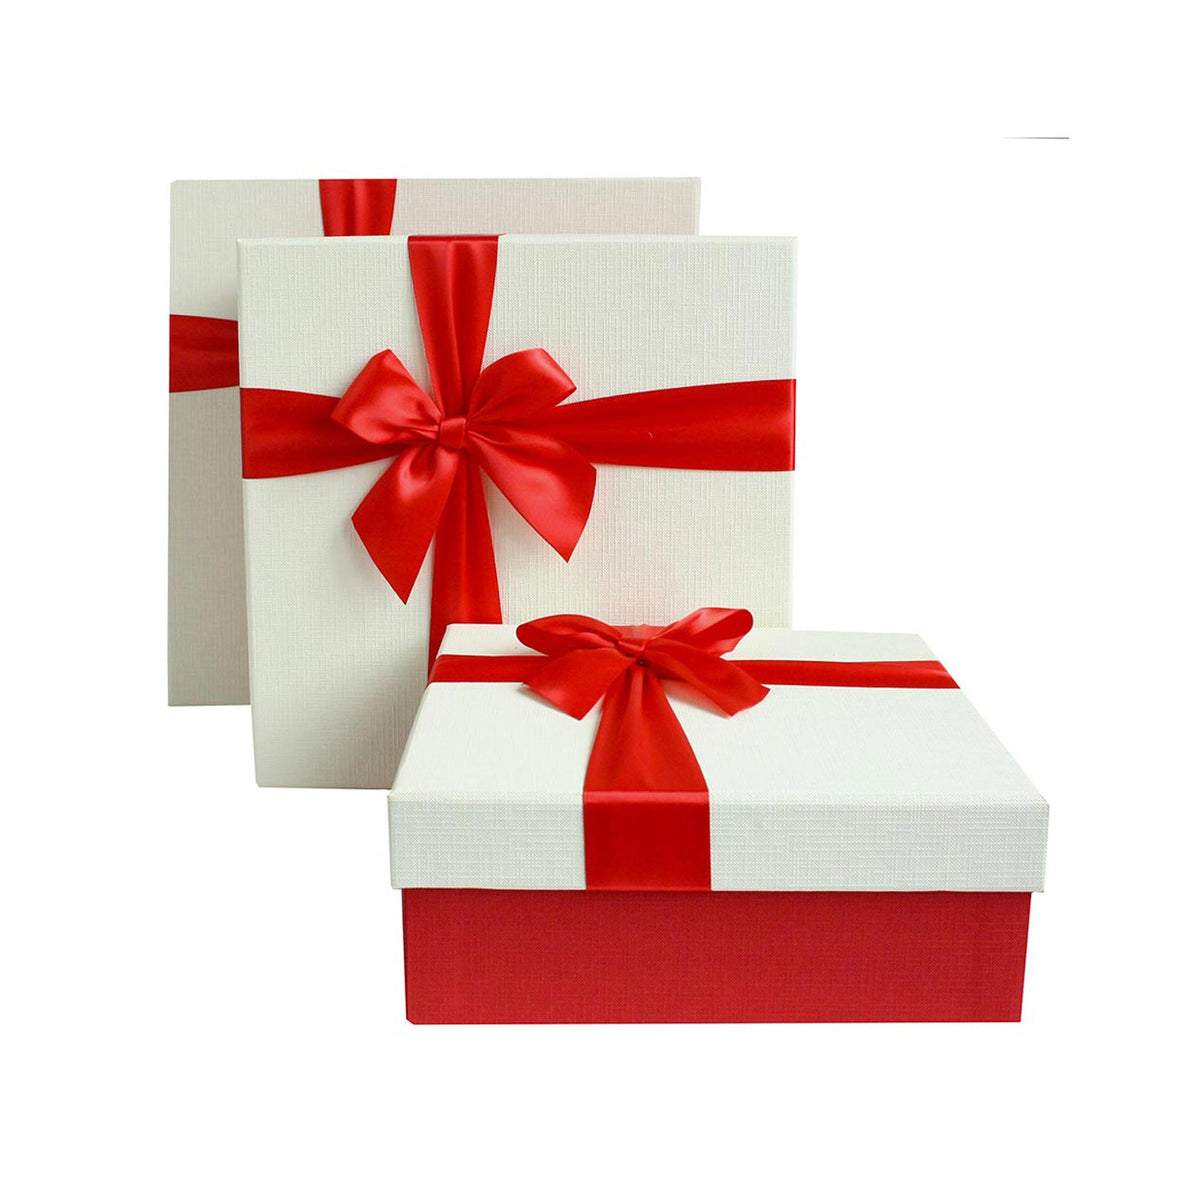 Luxury Red/White Gift Boxes - Set of 3